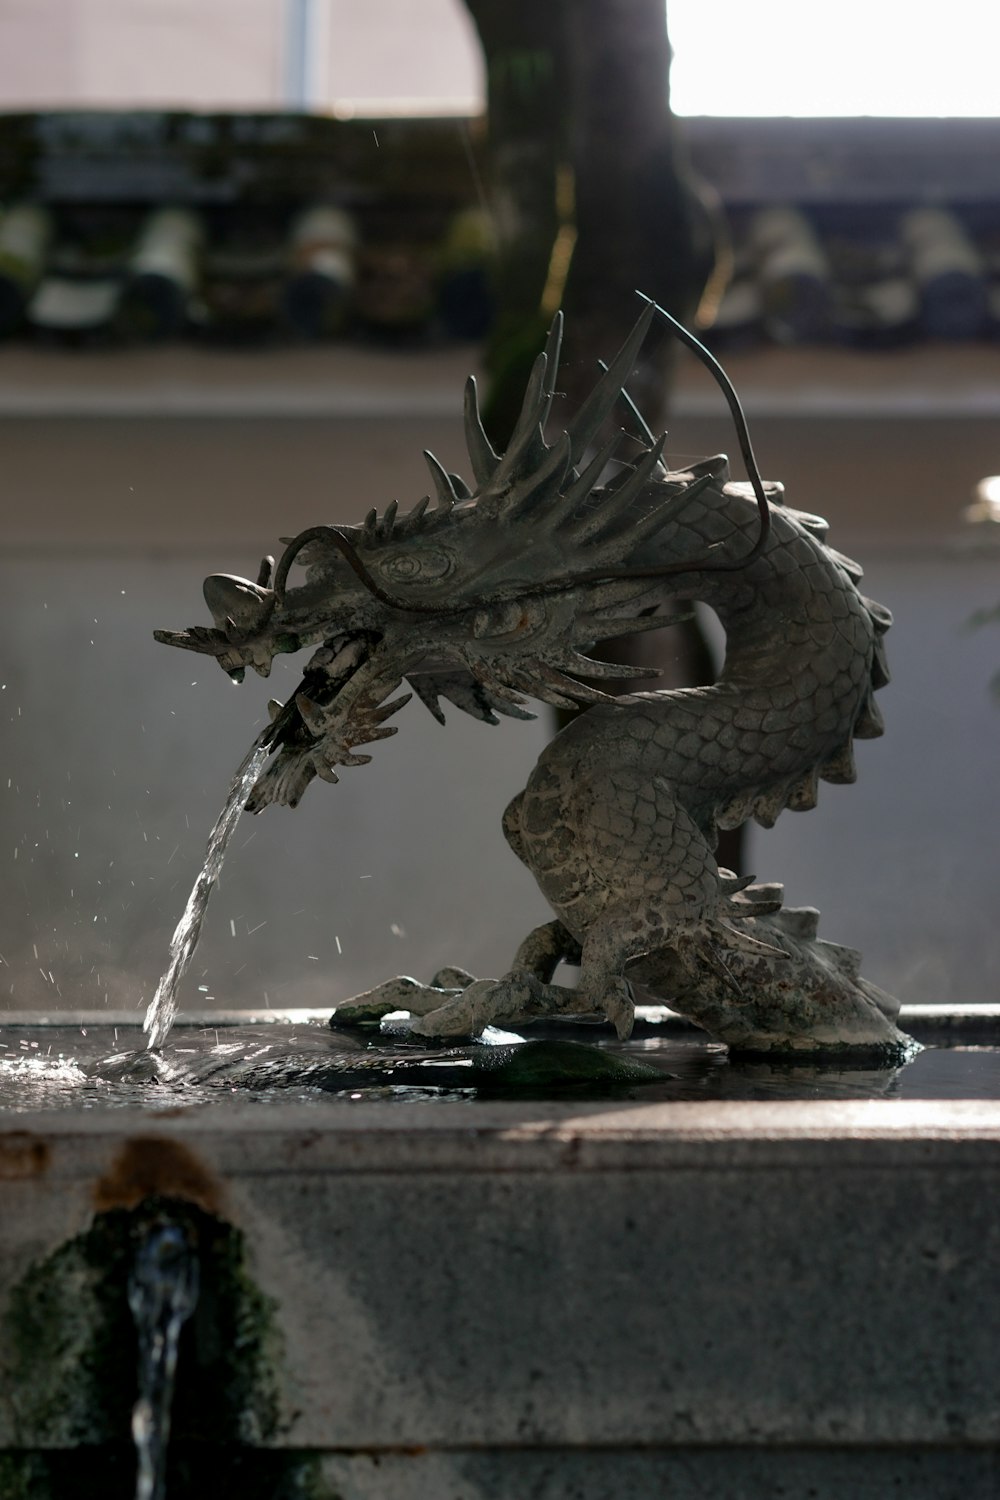 a statue of a dragon drinking water from a fountain